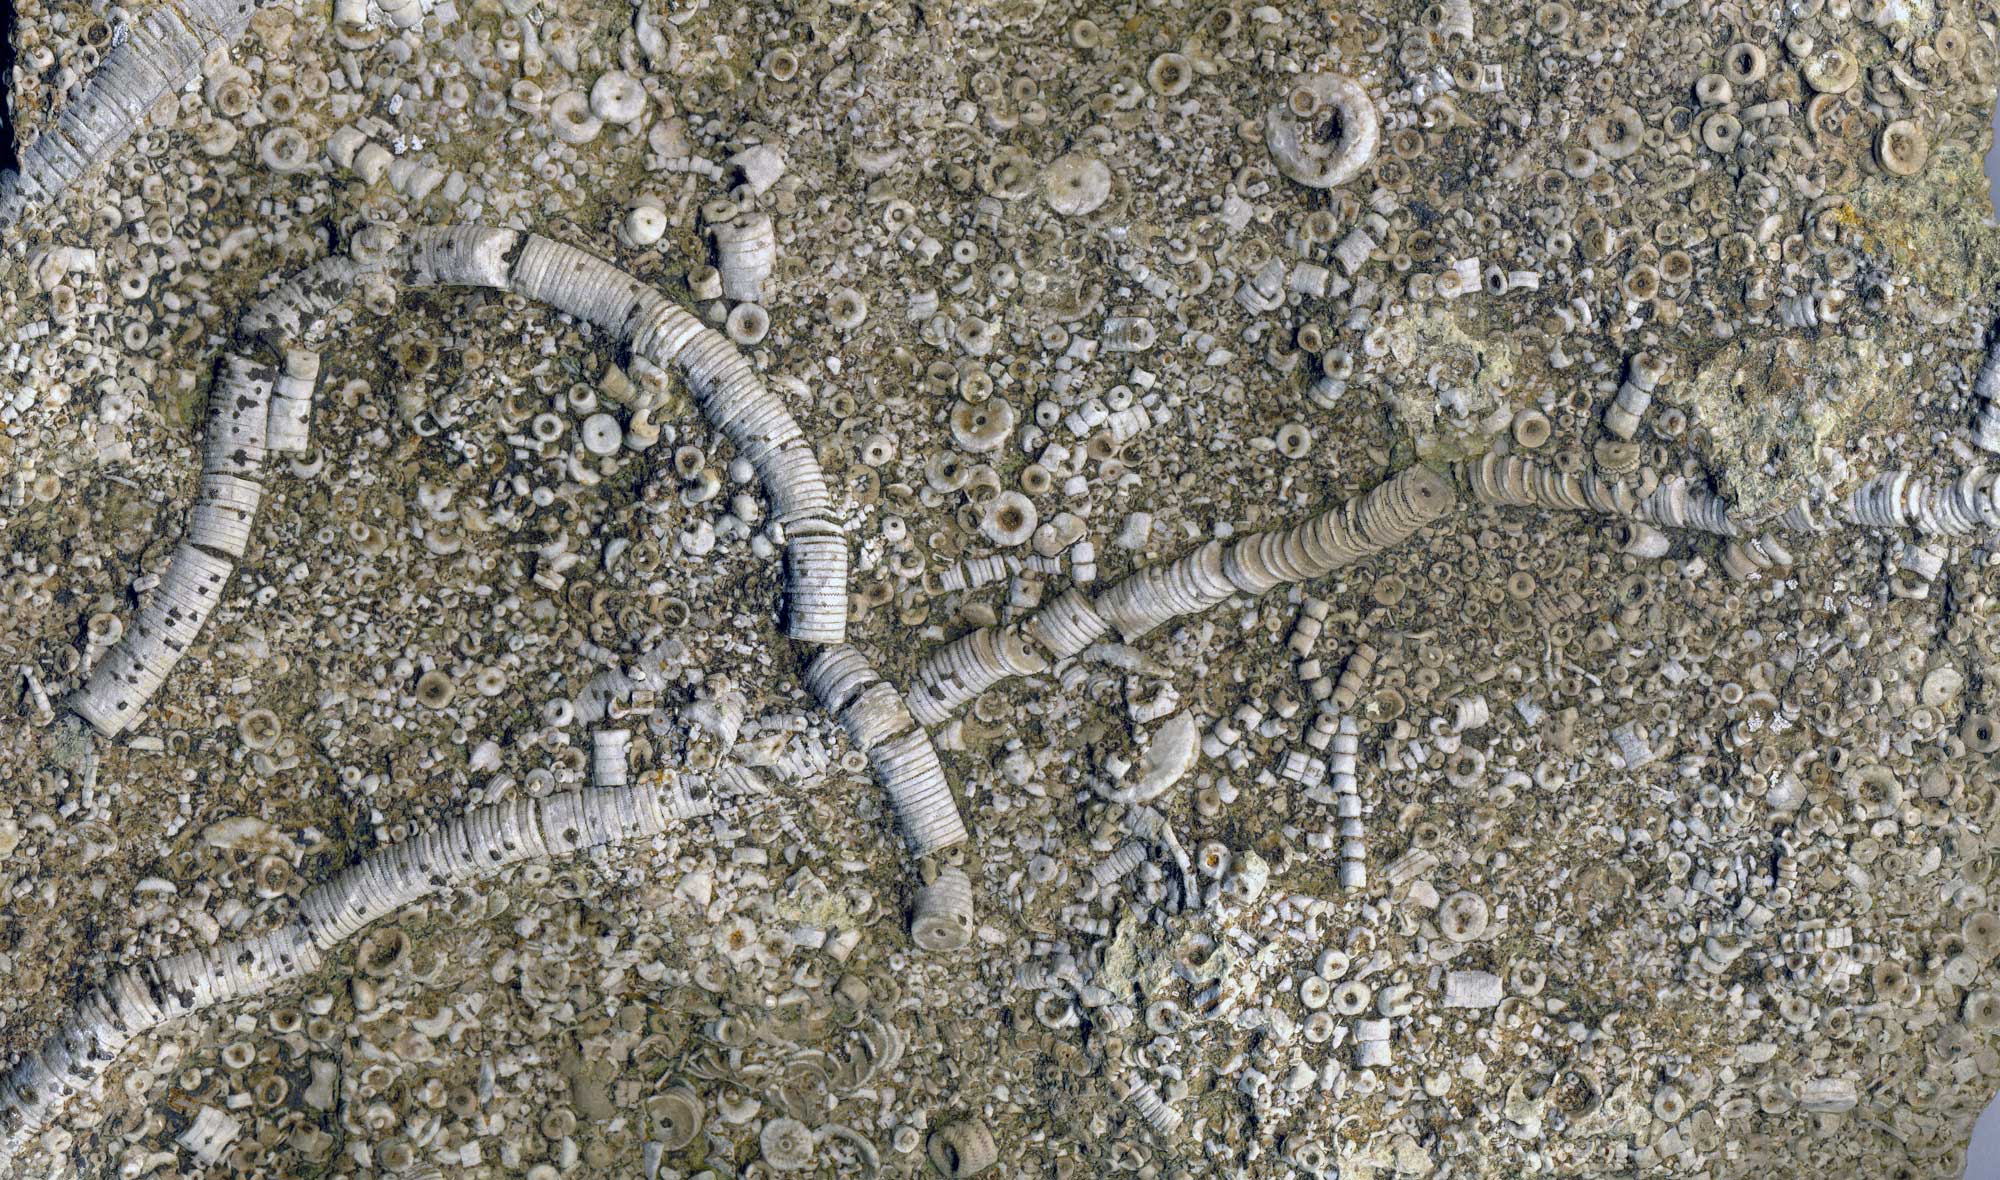 Photograph of crinoidal limestone showing crinoid stems and stem fragments.